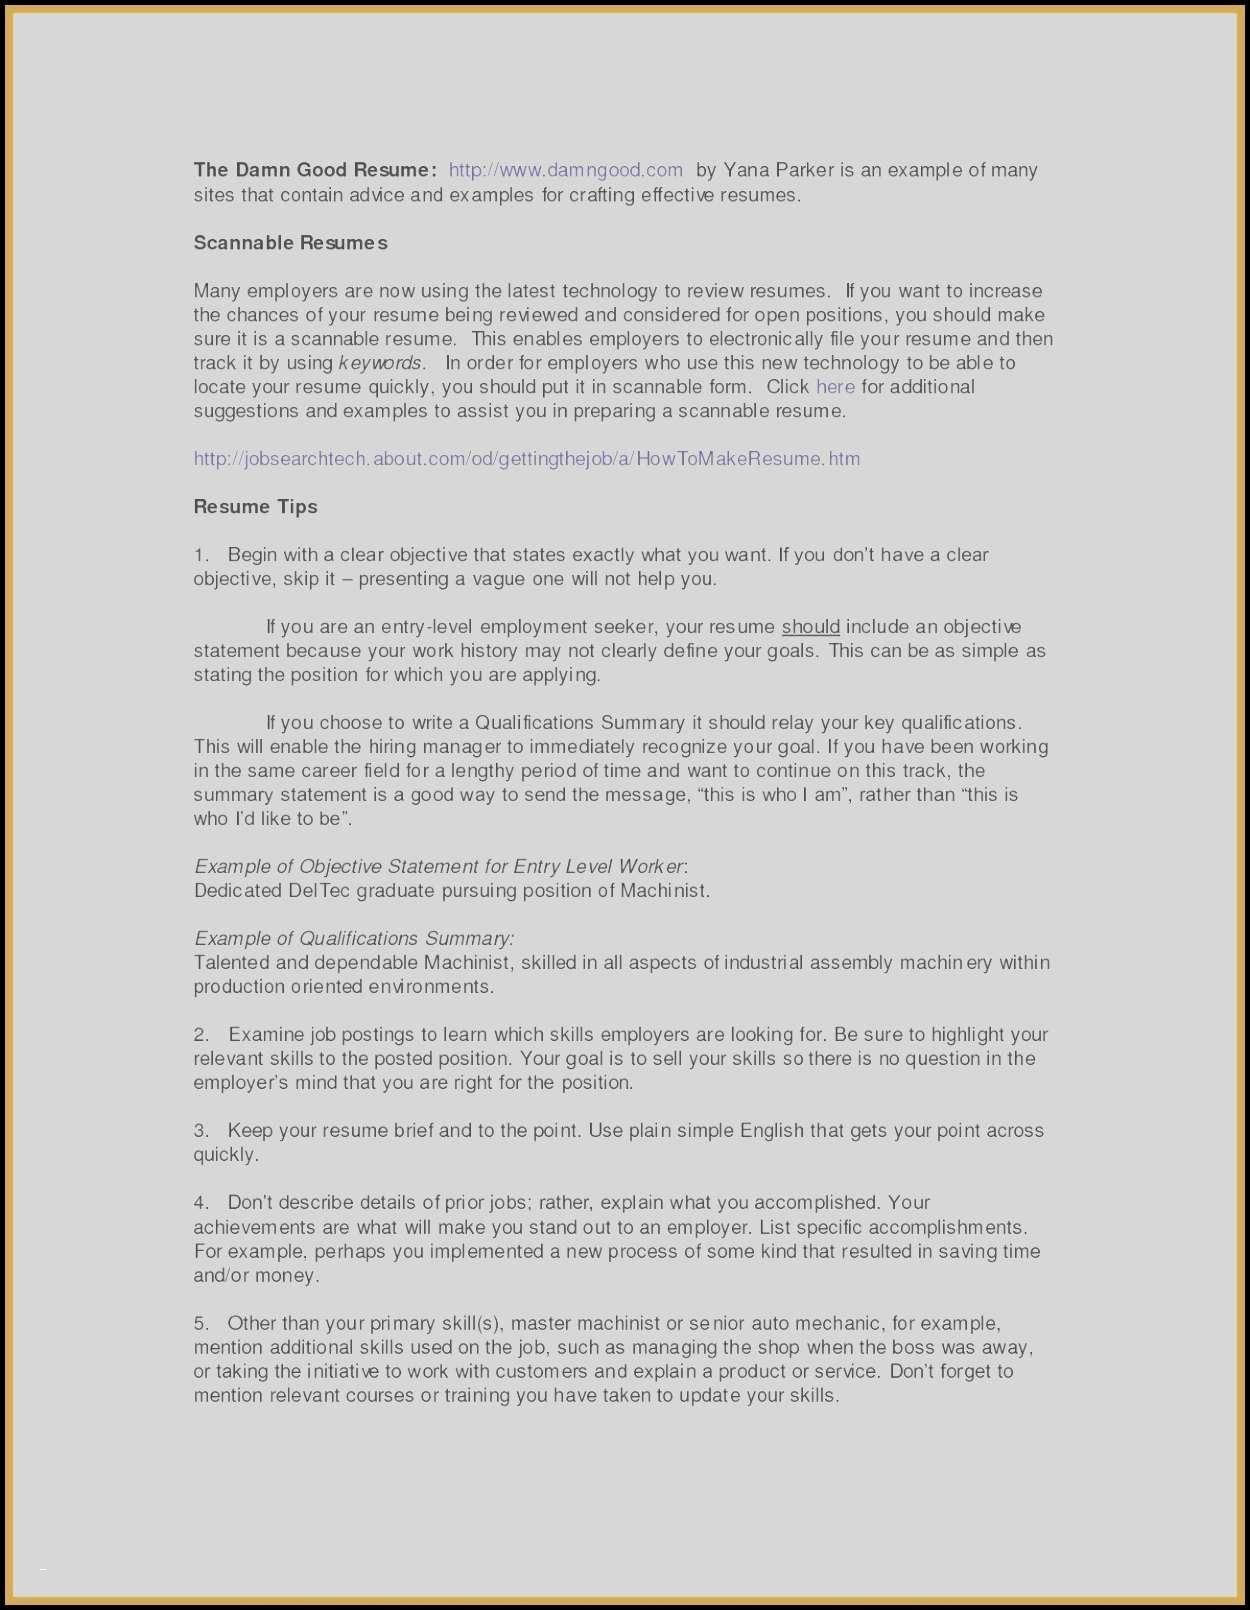 Resume Objective Example Law Enforcement Resume Objective Elegant 50 Resume Objective Examples Career Objectives For All Jobs Tips It Of Law Enforcement Resume Objective resume objective example|wikiresume.com